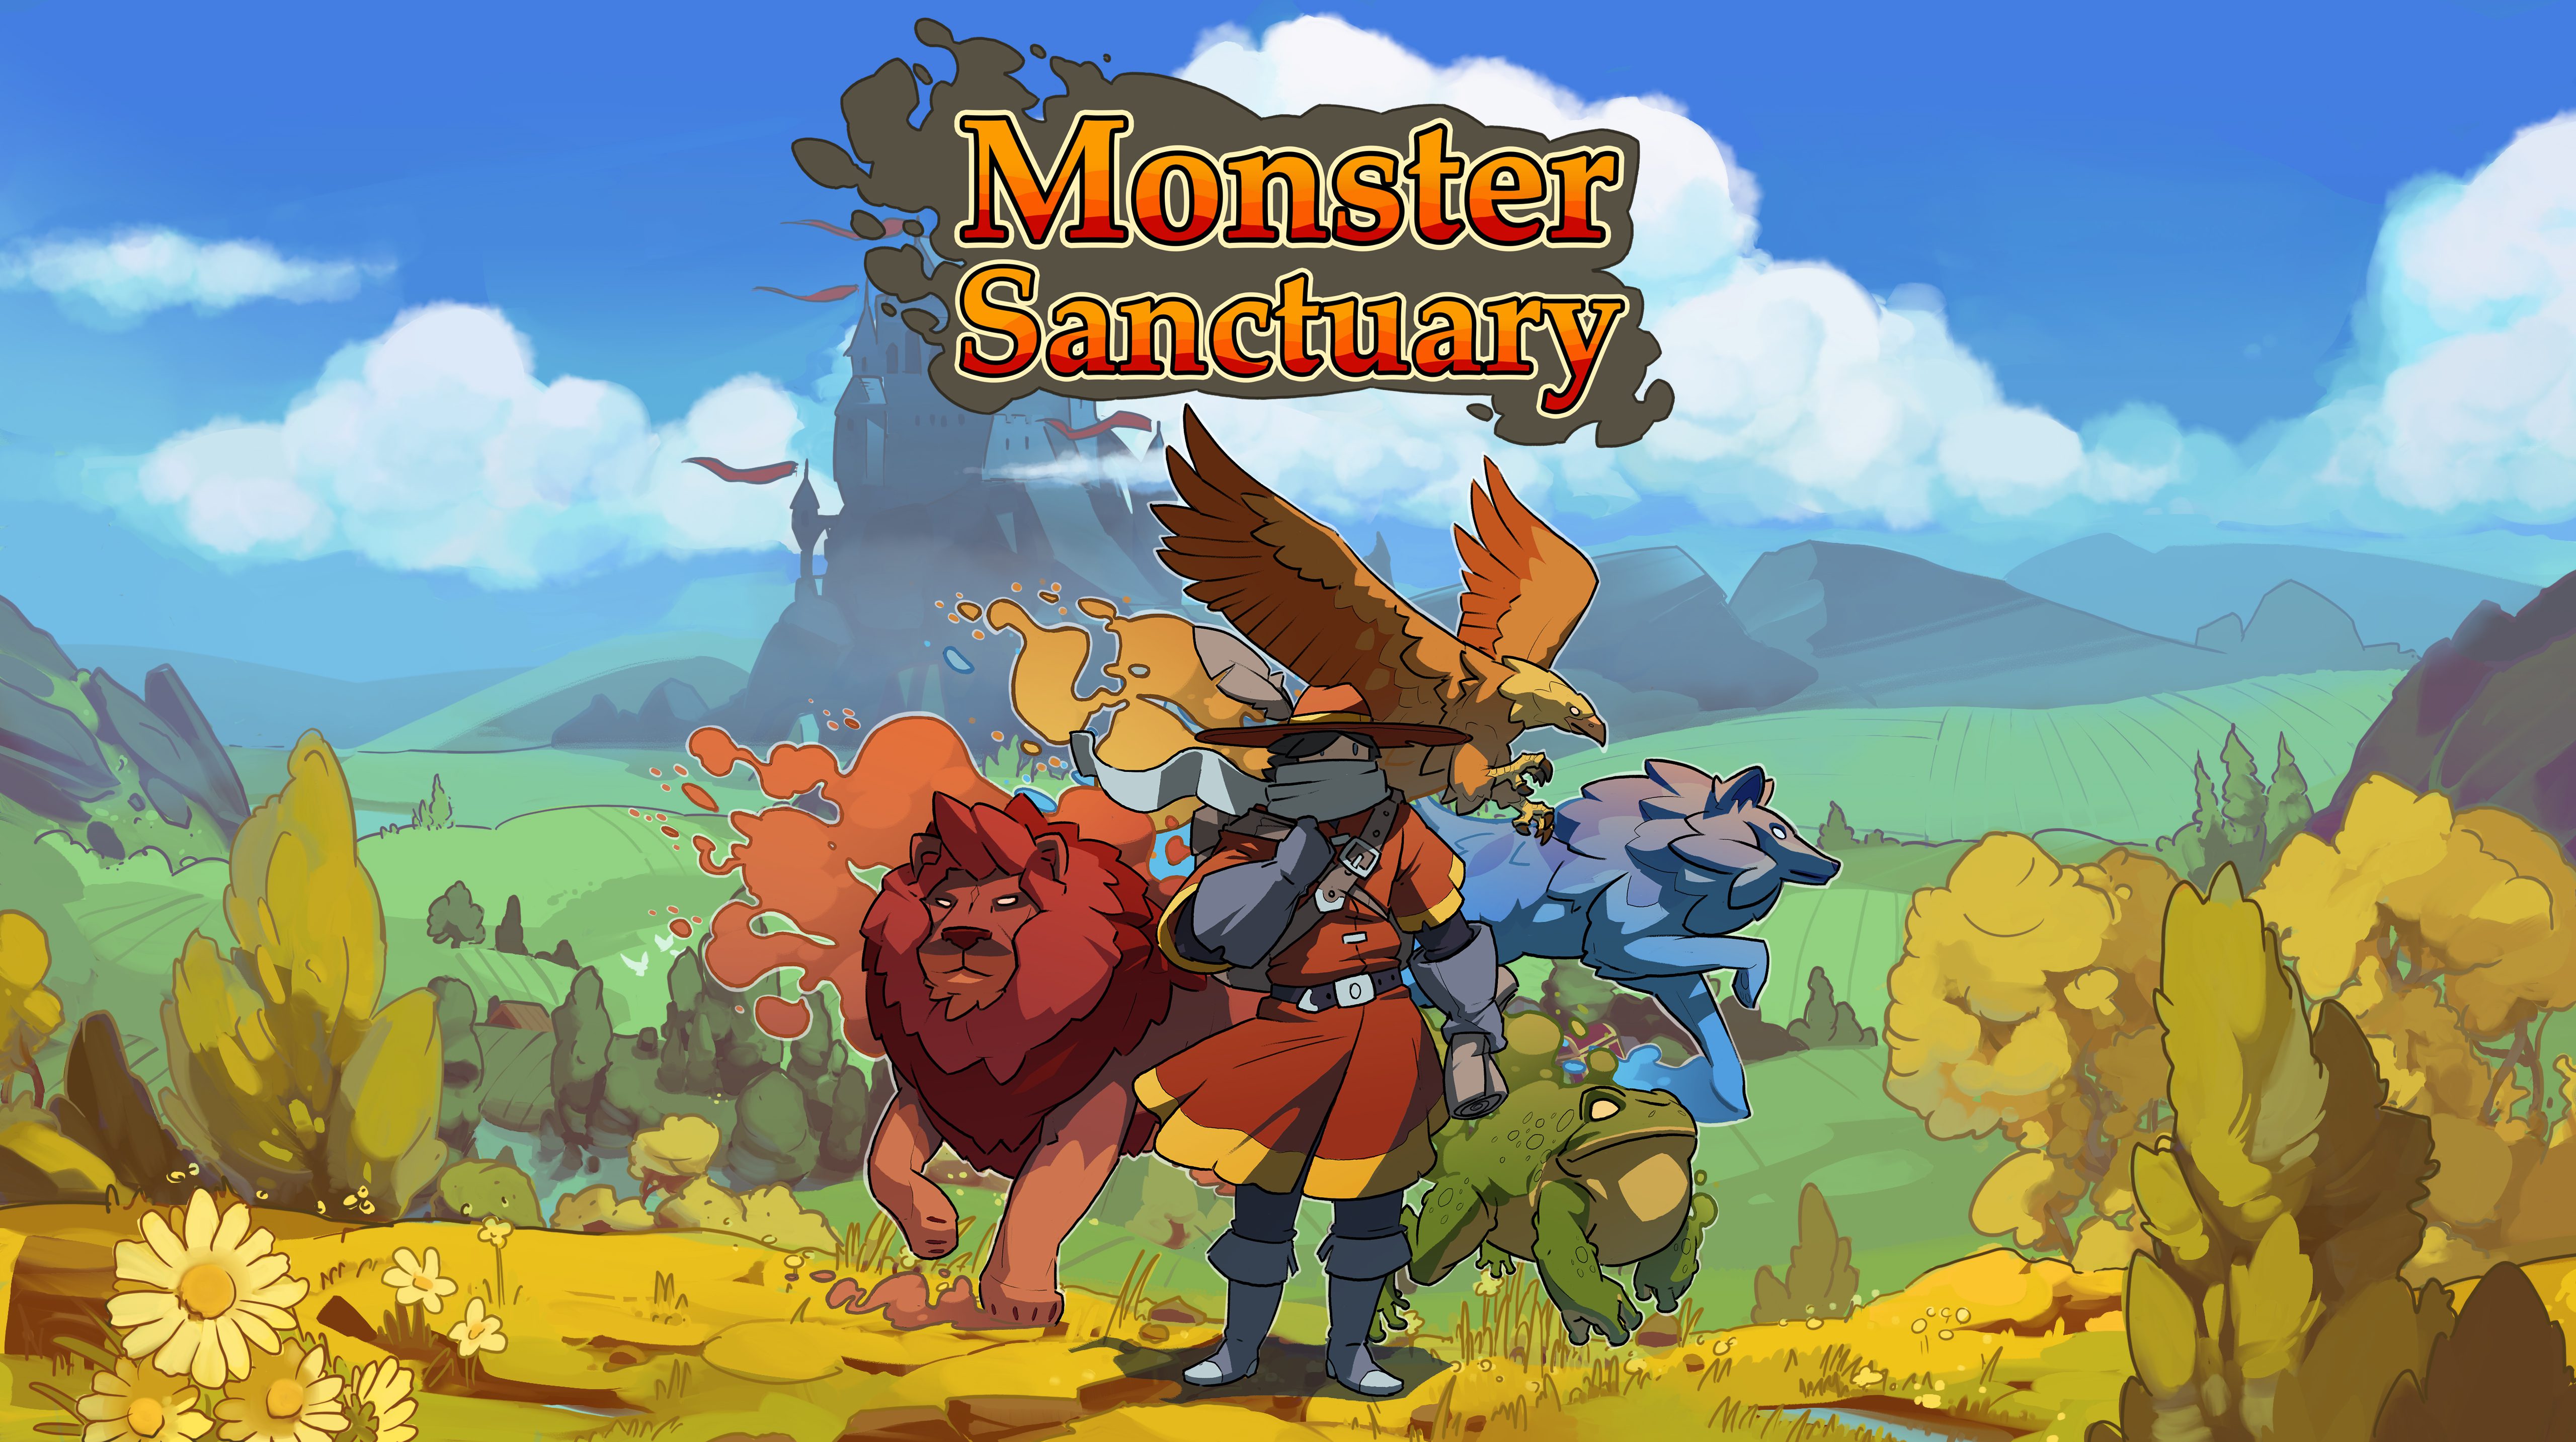 Monster Sanctuary is a monster collecting/battling Metroidvania game